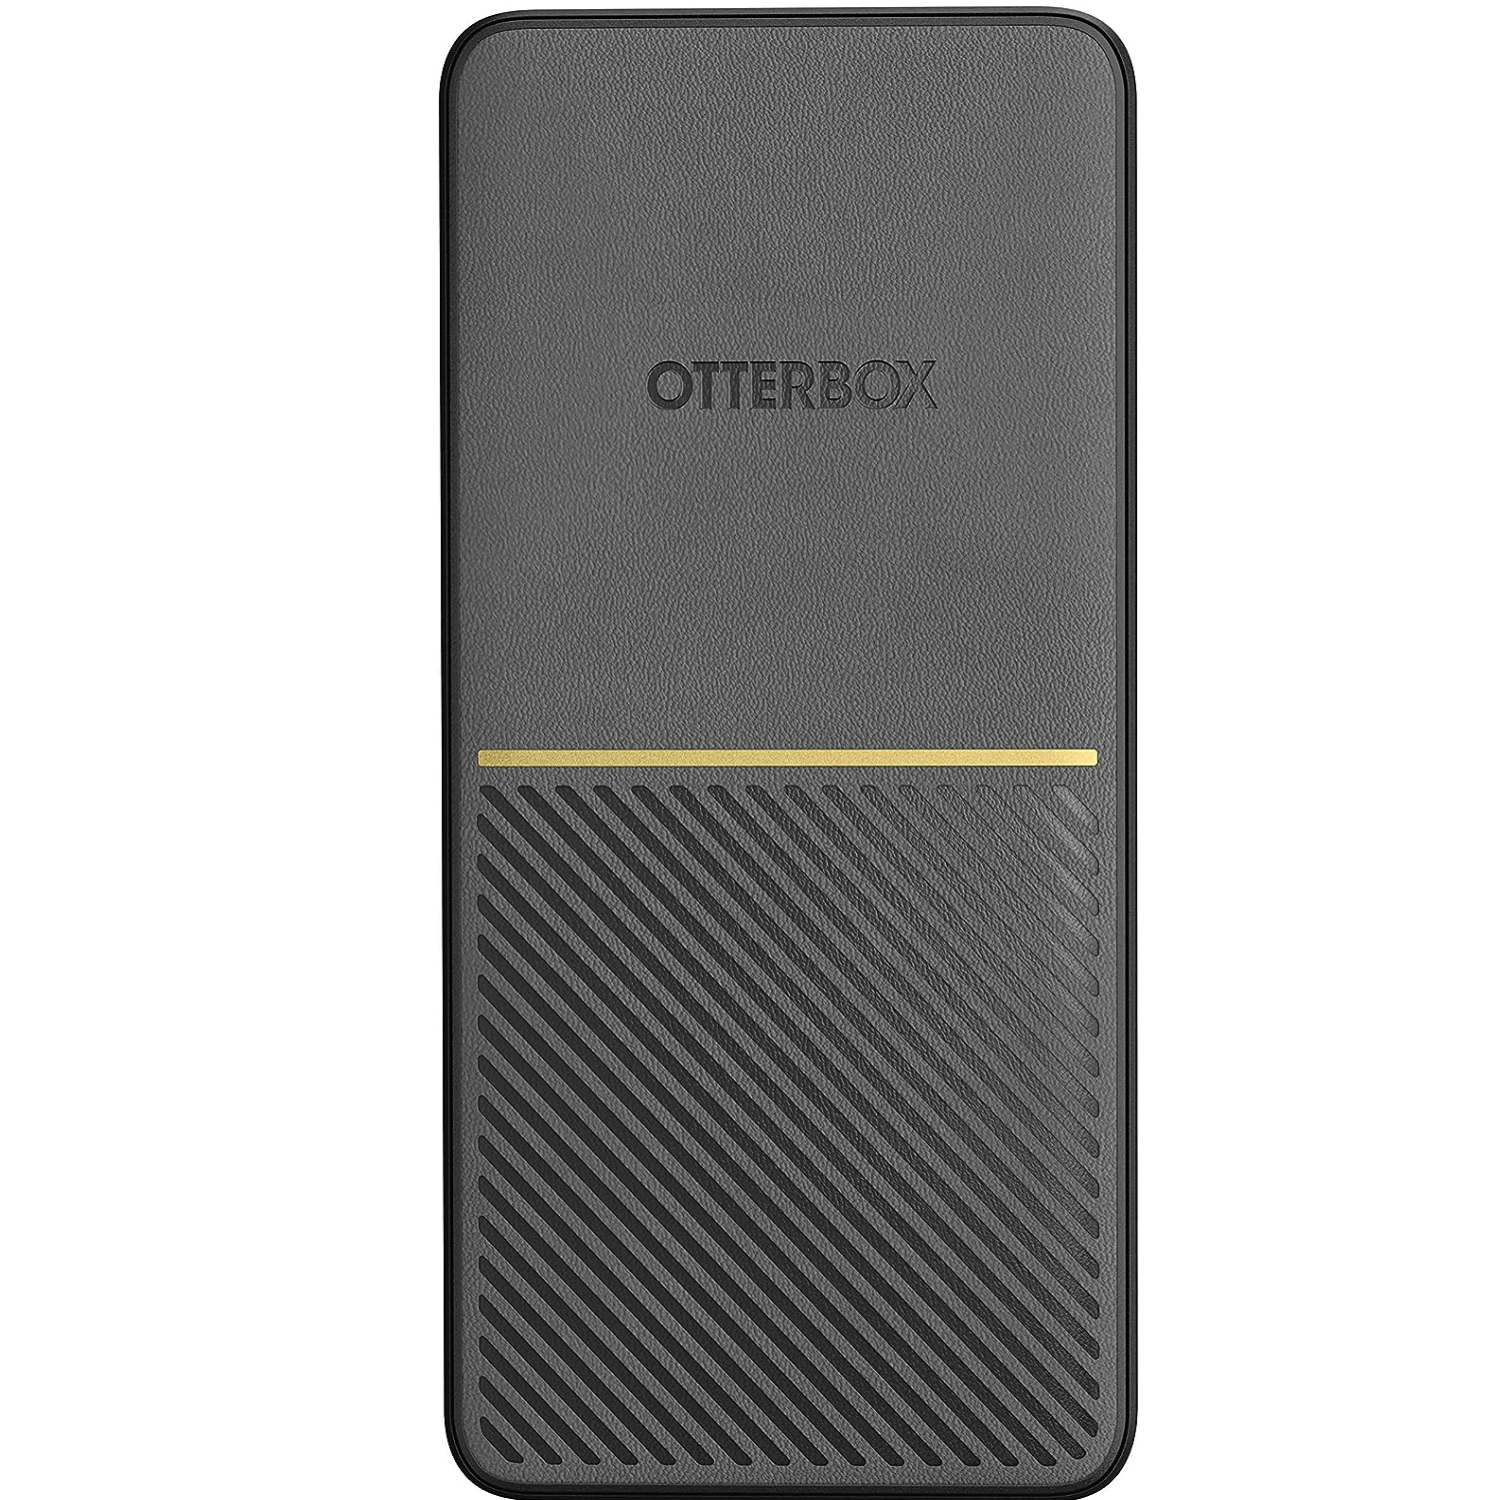 OtterBox Premium Fast Charge Power Bank on white background.